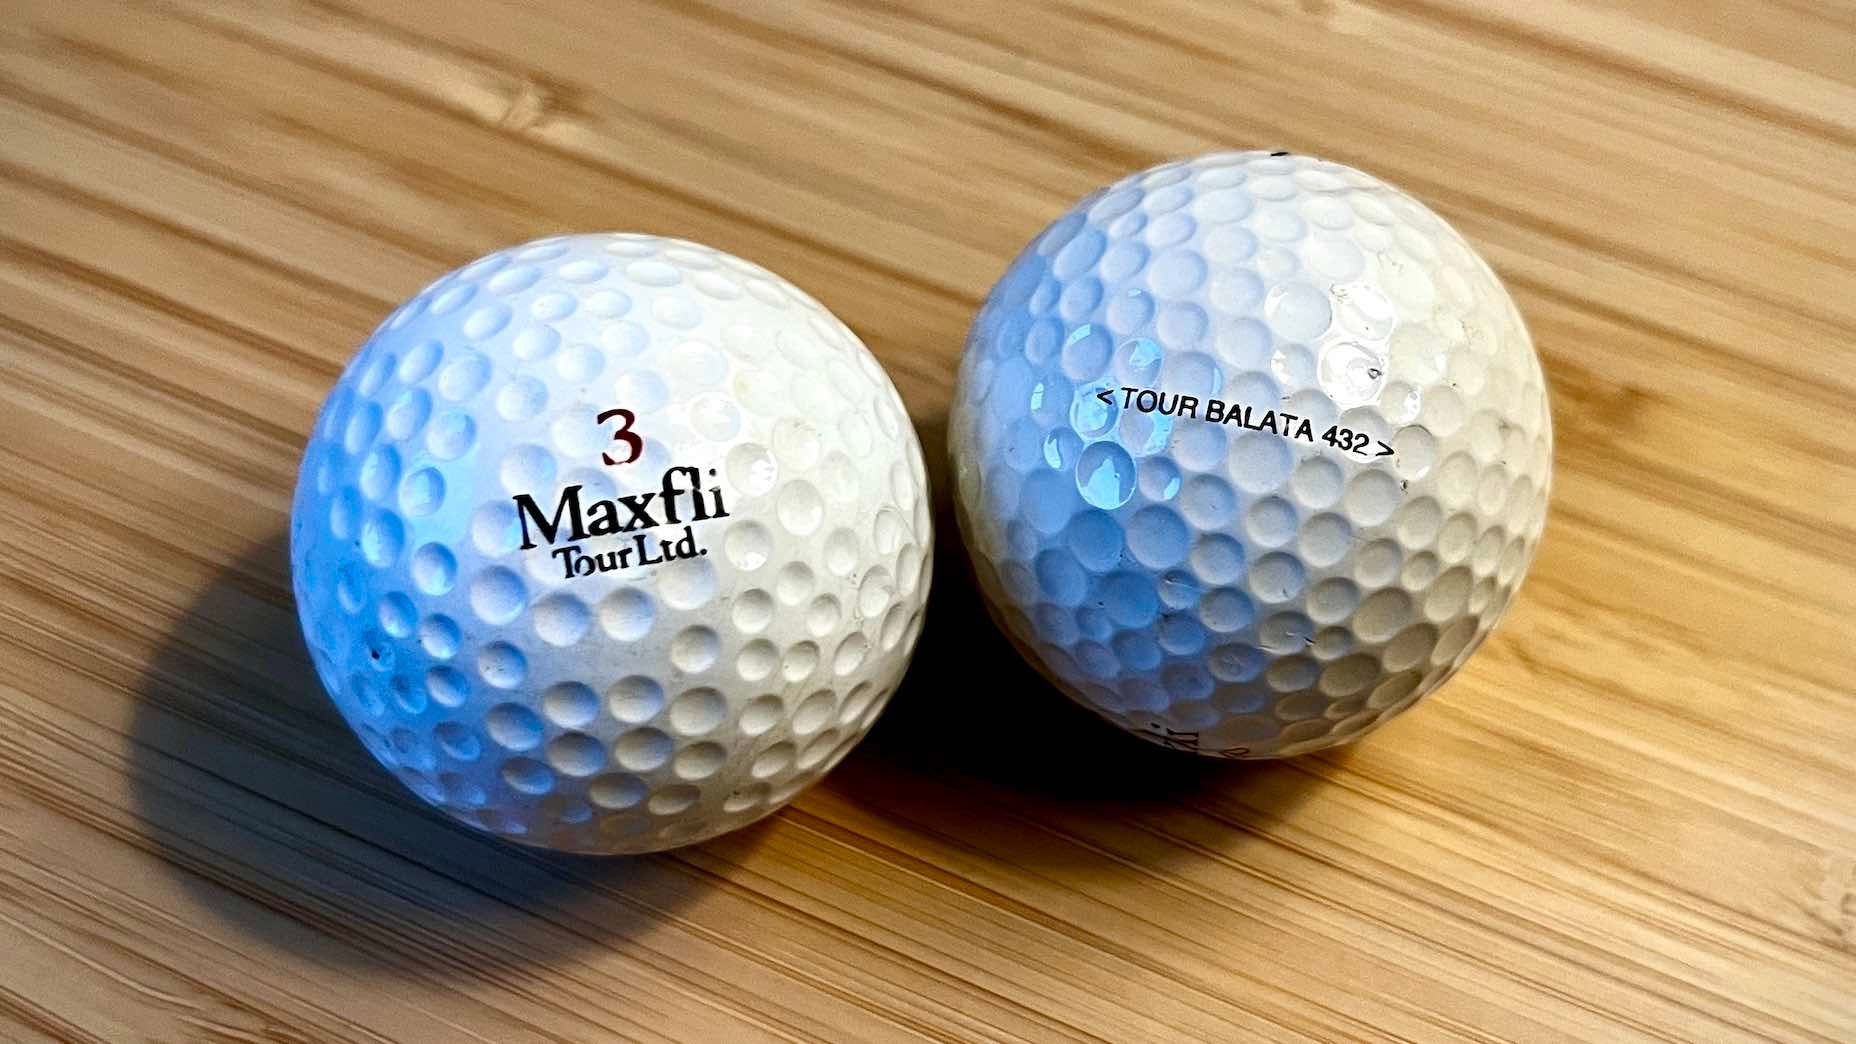 Tiger Woods brought this vintage golf ball to the Masters and wowed